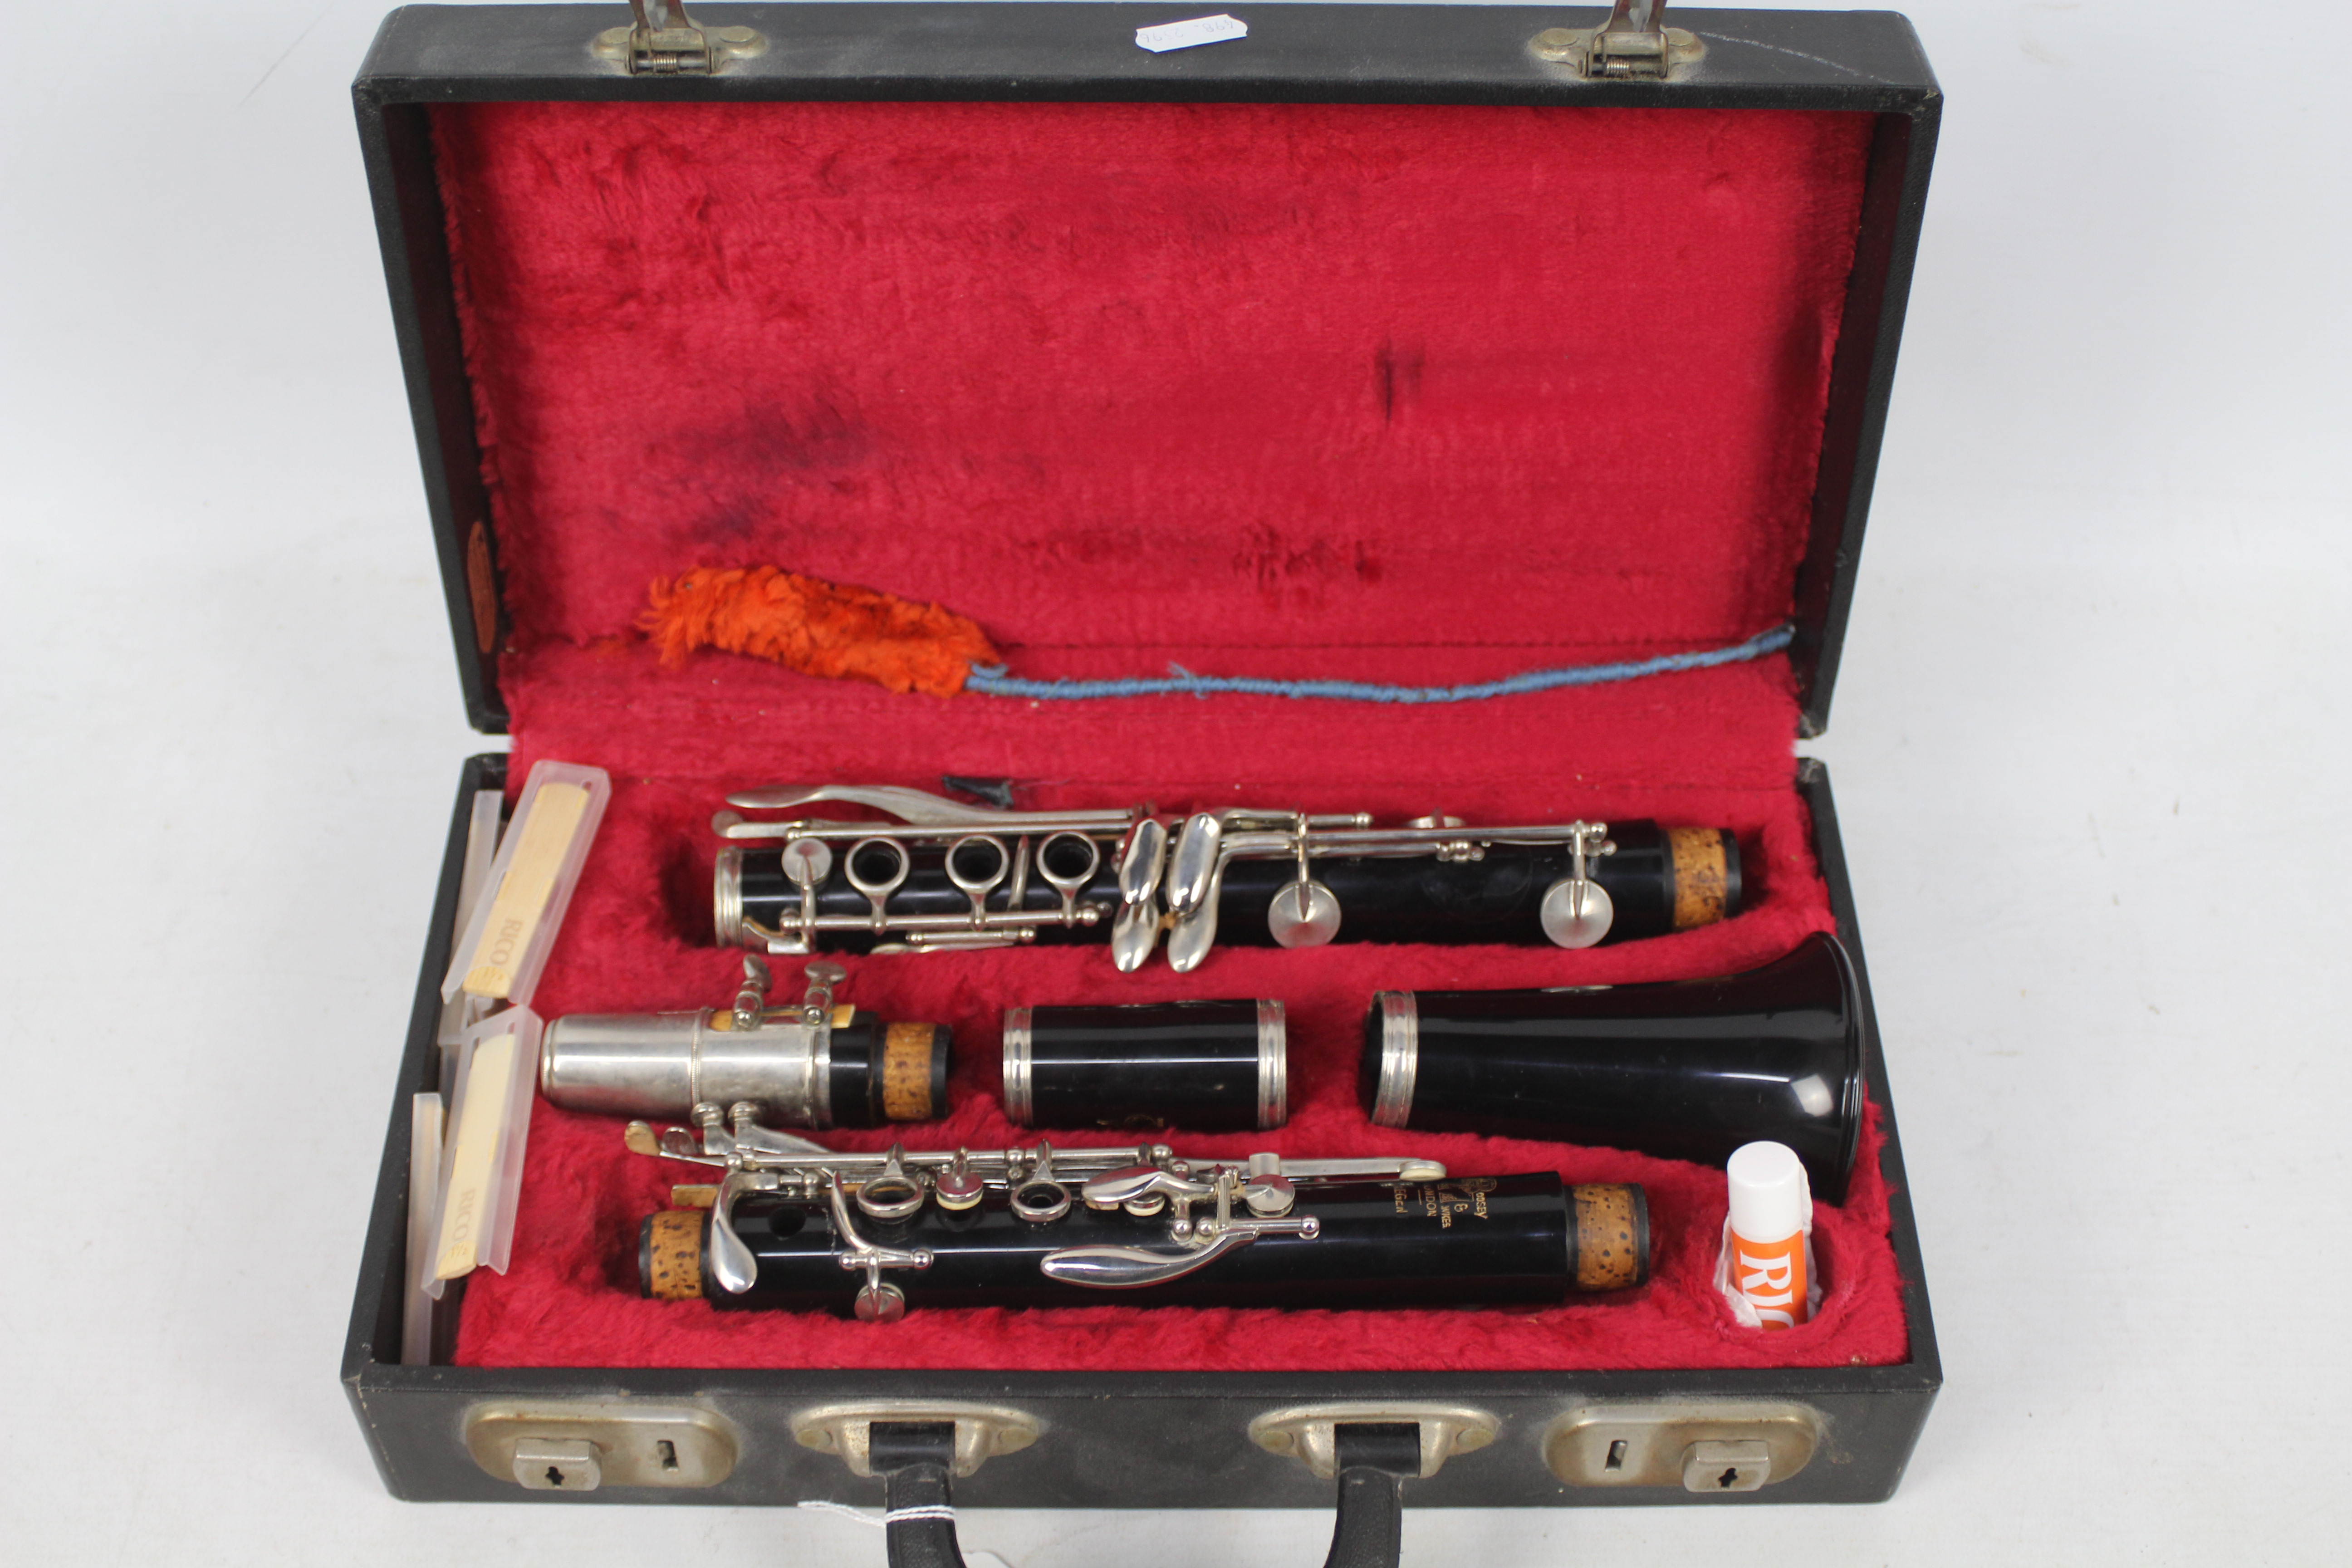 A cased Boosey & Hawkes Regent clarinet, numbered 491572.